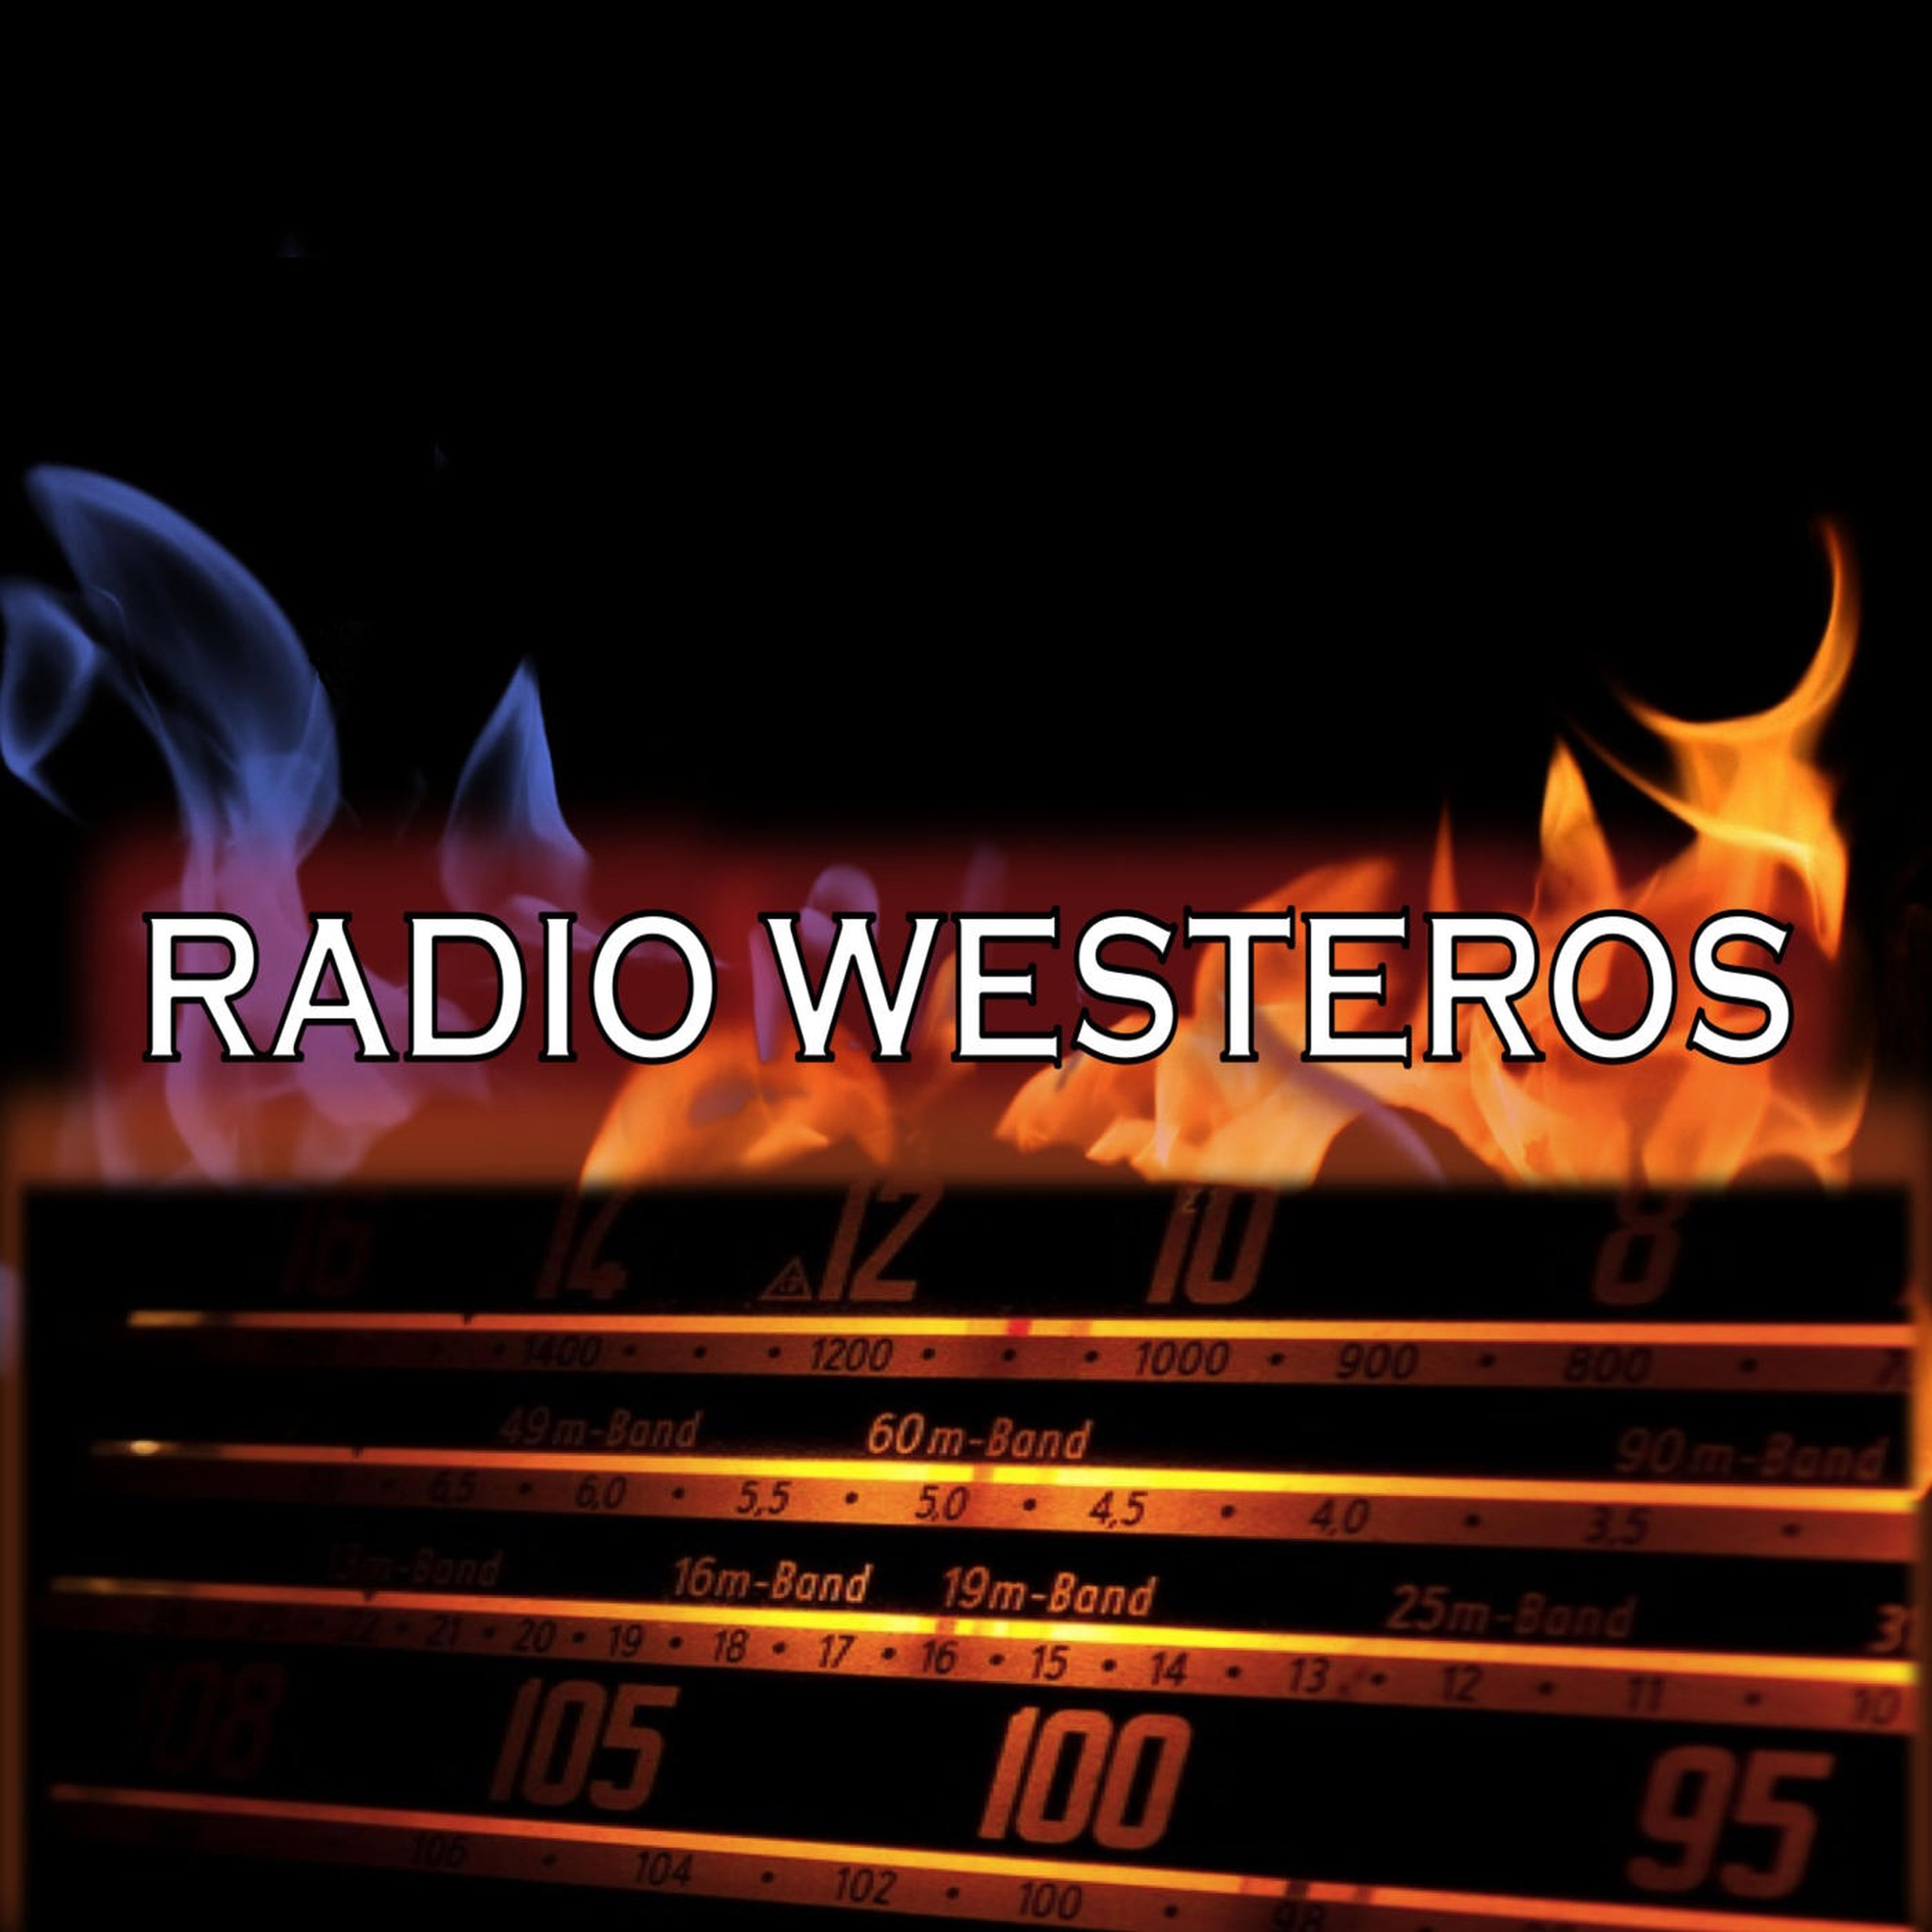 Radio Westeros E27 Ned - For Love and Honor